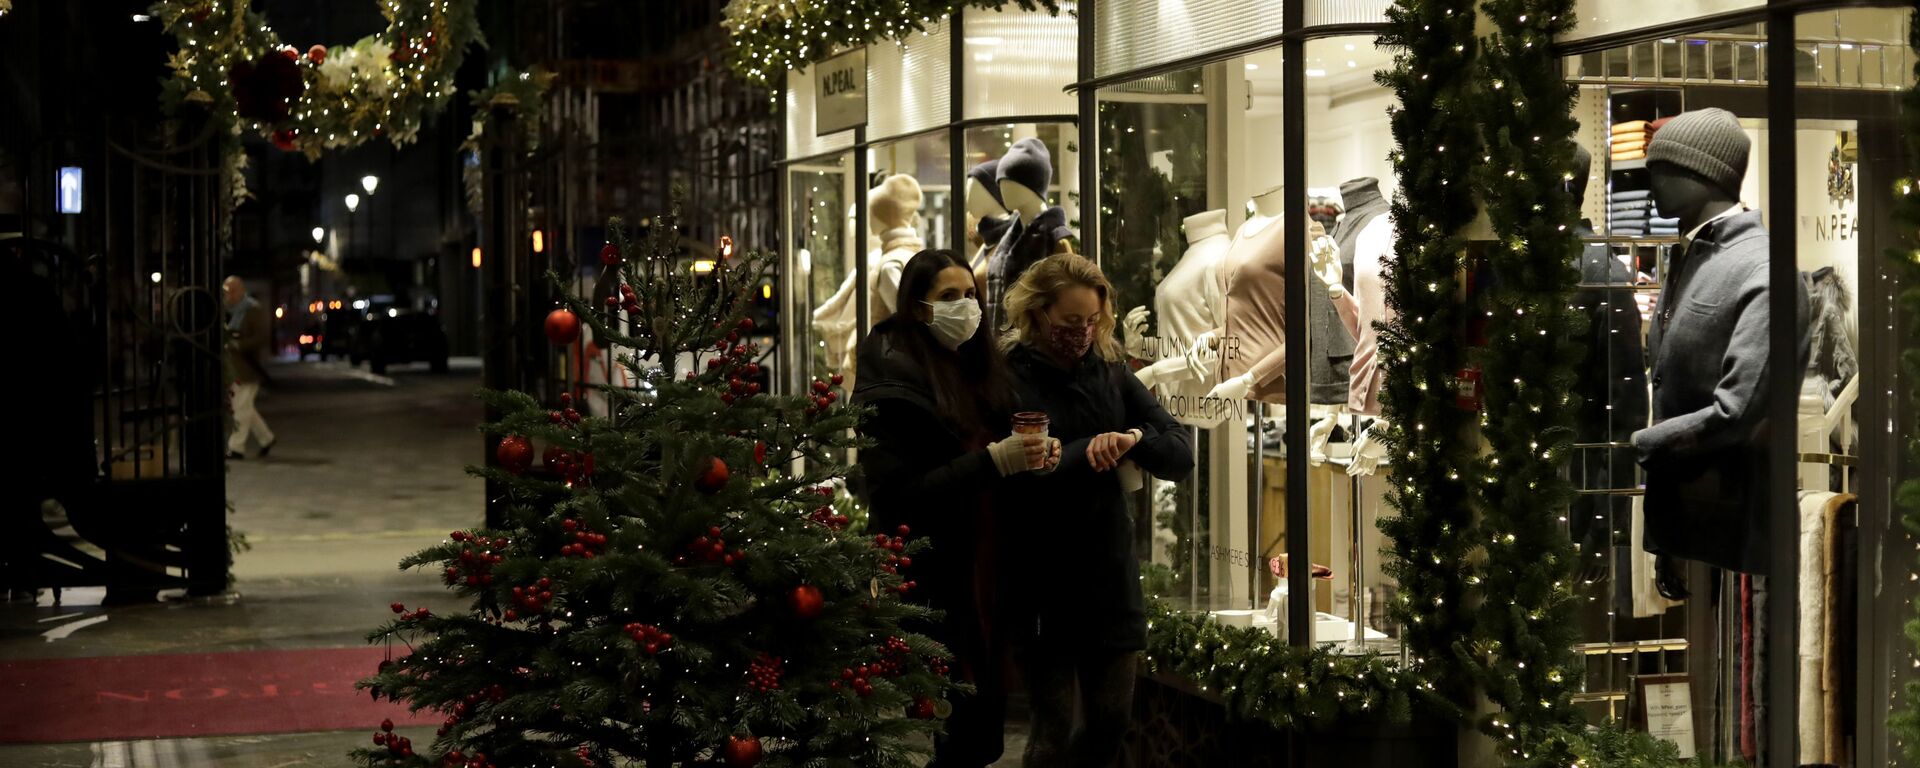 Women wearing face masks walk past a Christmas tree and lights in Burlington Arcade, where all non-essential shops are temporarily closed during England's second coronavirus lockdown, in London, Wednesday, Nov. 25, 2020 - Sputnik International, 1920, 19.12.2021